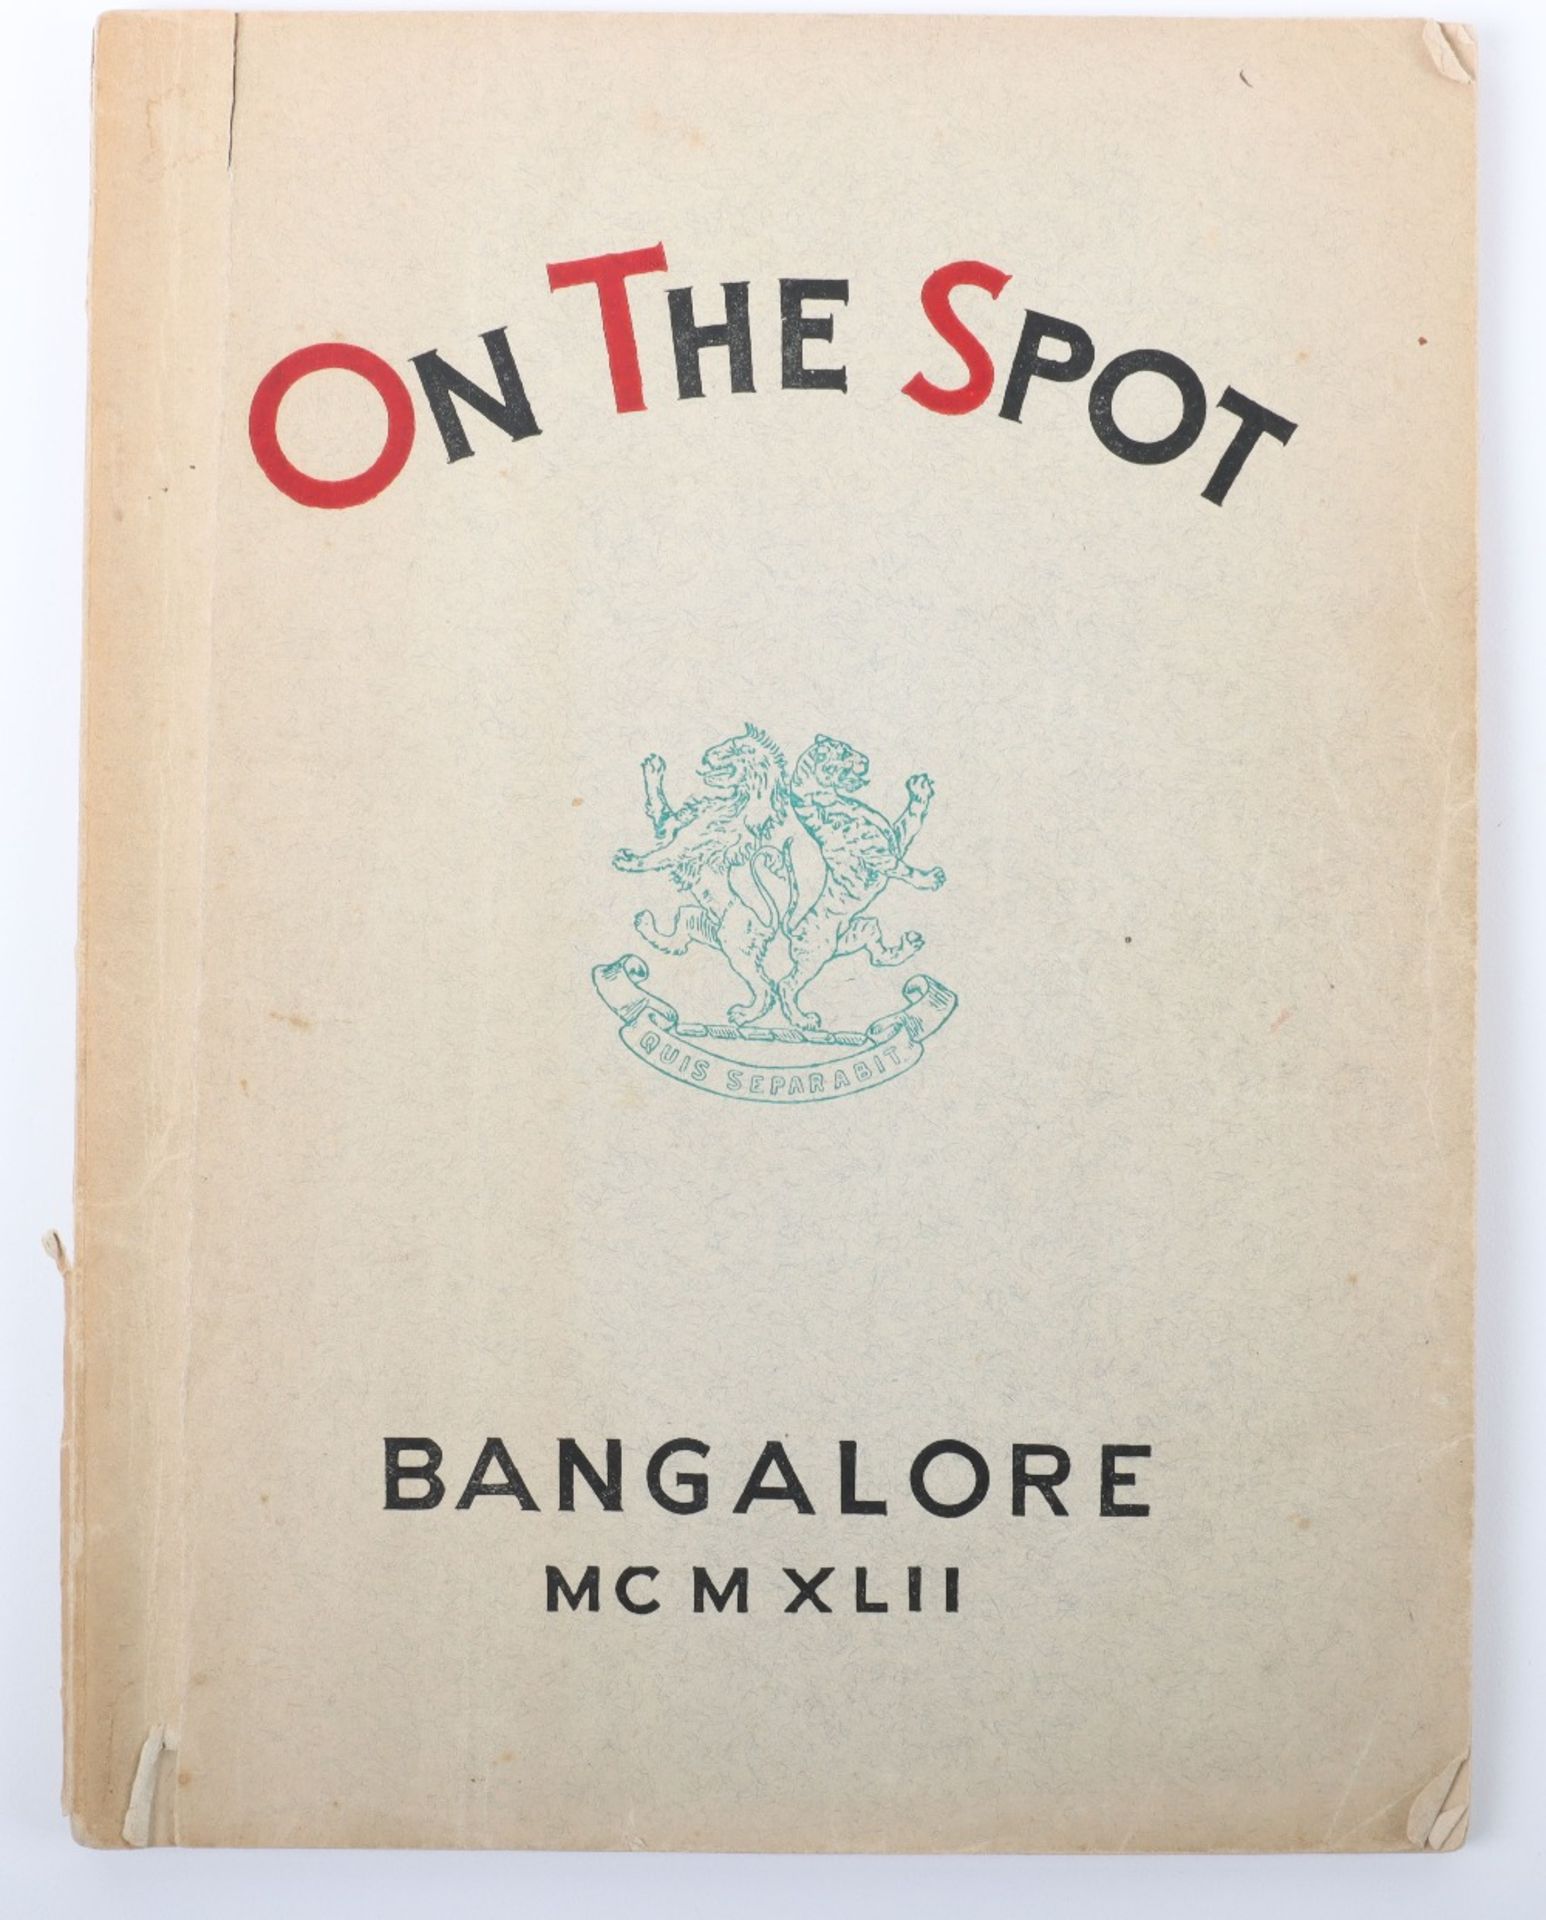 Bangalore, "On The Spot" MCMXLII (1942) Volume I Number III Military School Journal with Detailed Ro - Image 2 of 8